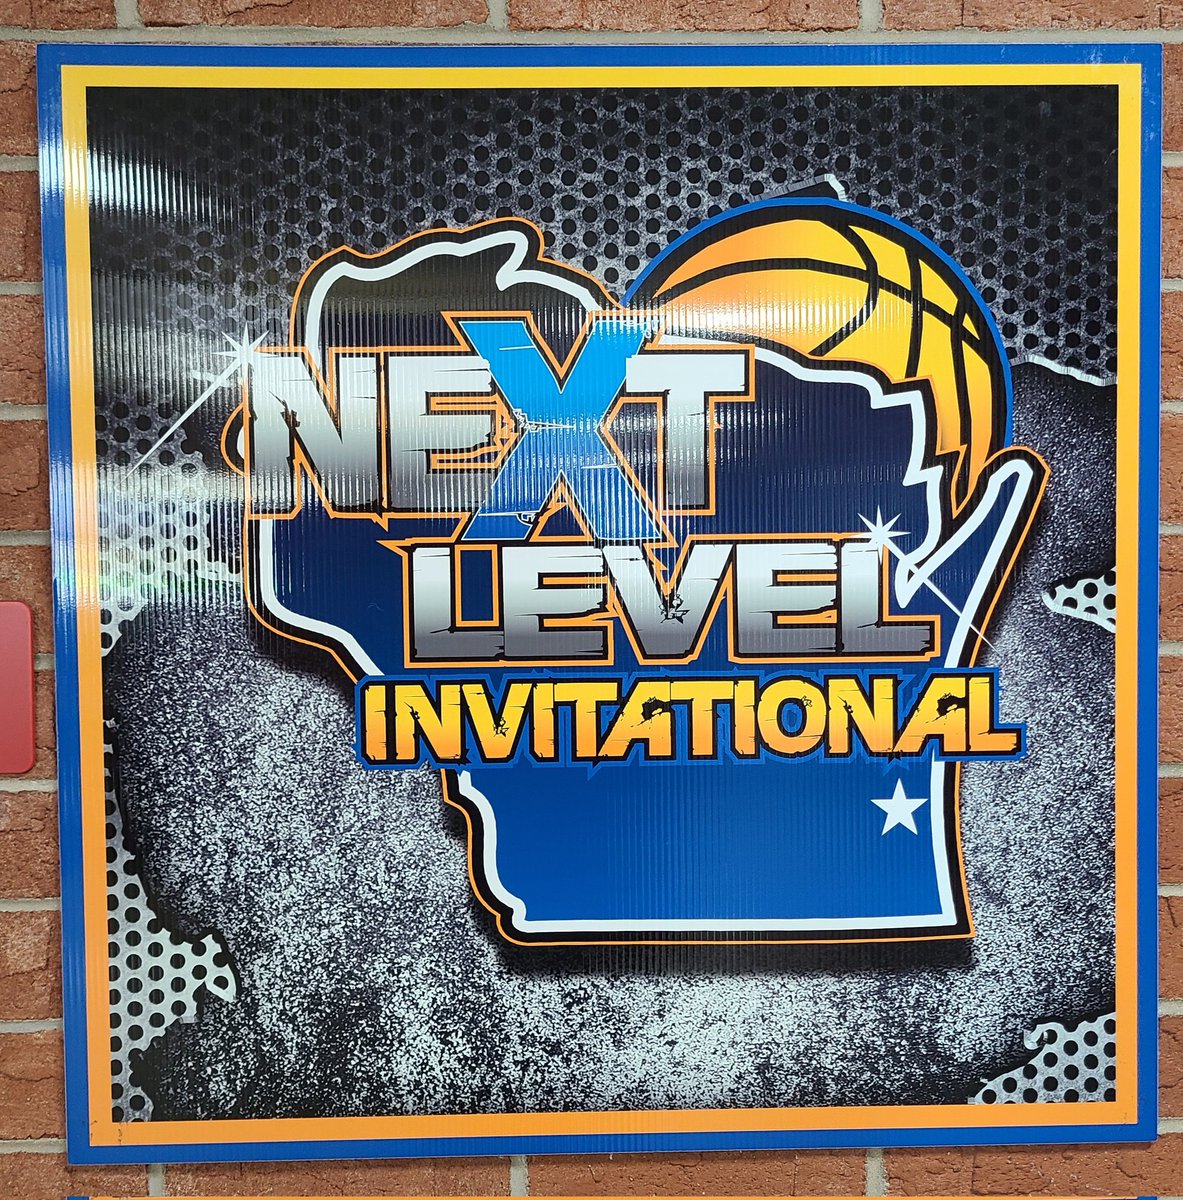 Strong finish @ny2lasports Next Level Invitational, 2-0 today. 64-48 W vs. @MidProAcademy South. 3-0 pool play. @the_owenryan12 10pts 5reb 3ast 3stl @colton__larsen 10pts @AustinHendd 10pts 6reb @ajhendricks_23 9pts 6reb 2ast 2stl @willkruegs45 9pts 8reb 4ast 2blk #Team1848